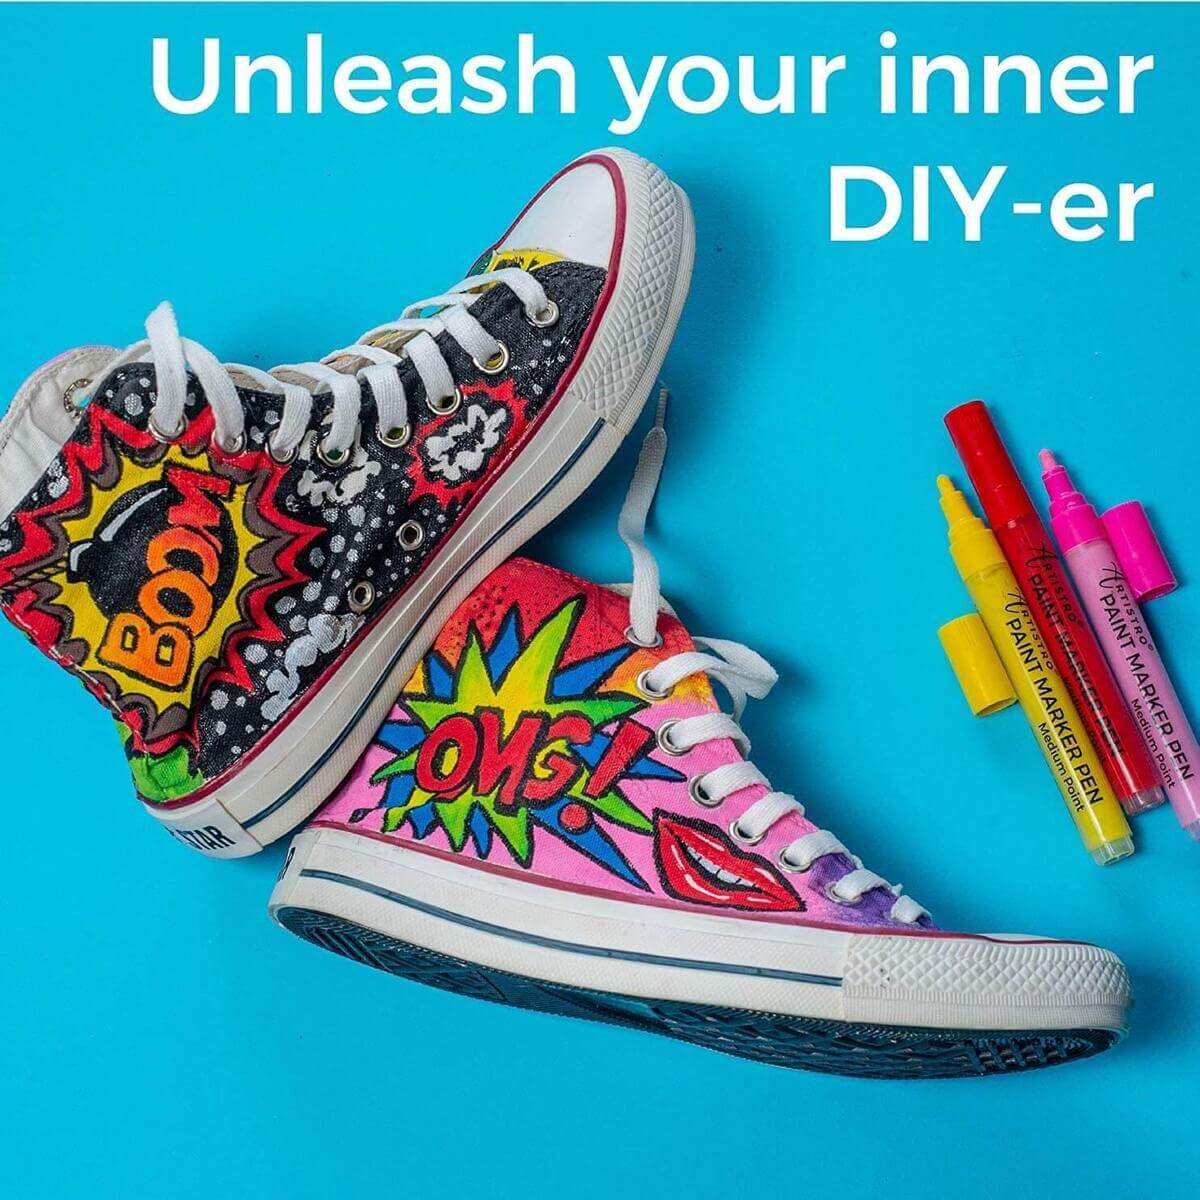 unleash your inner DIY-er with artistro markers